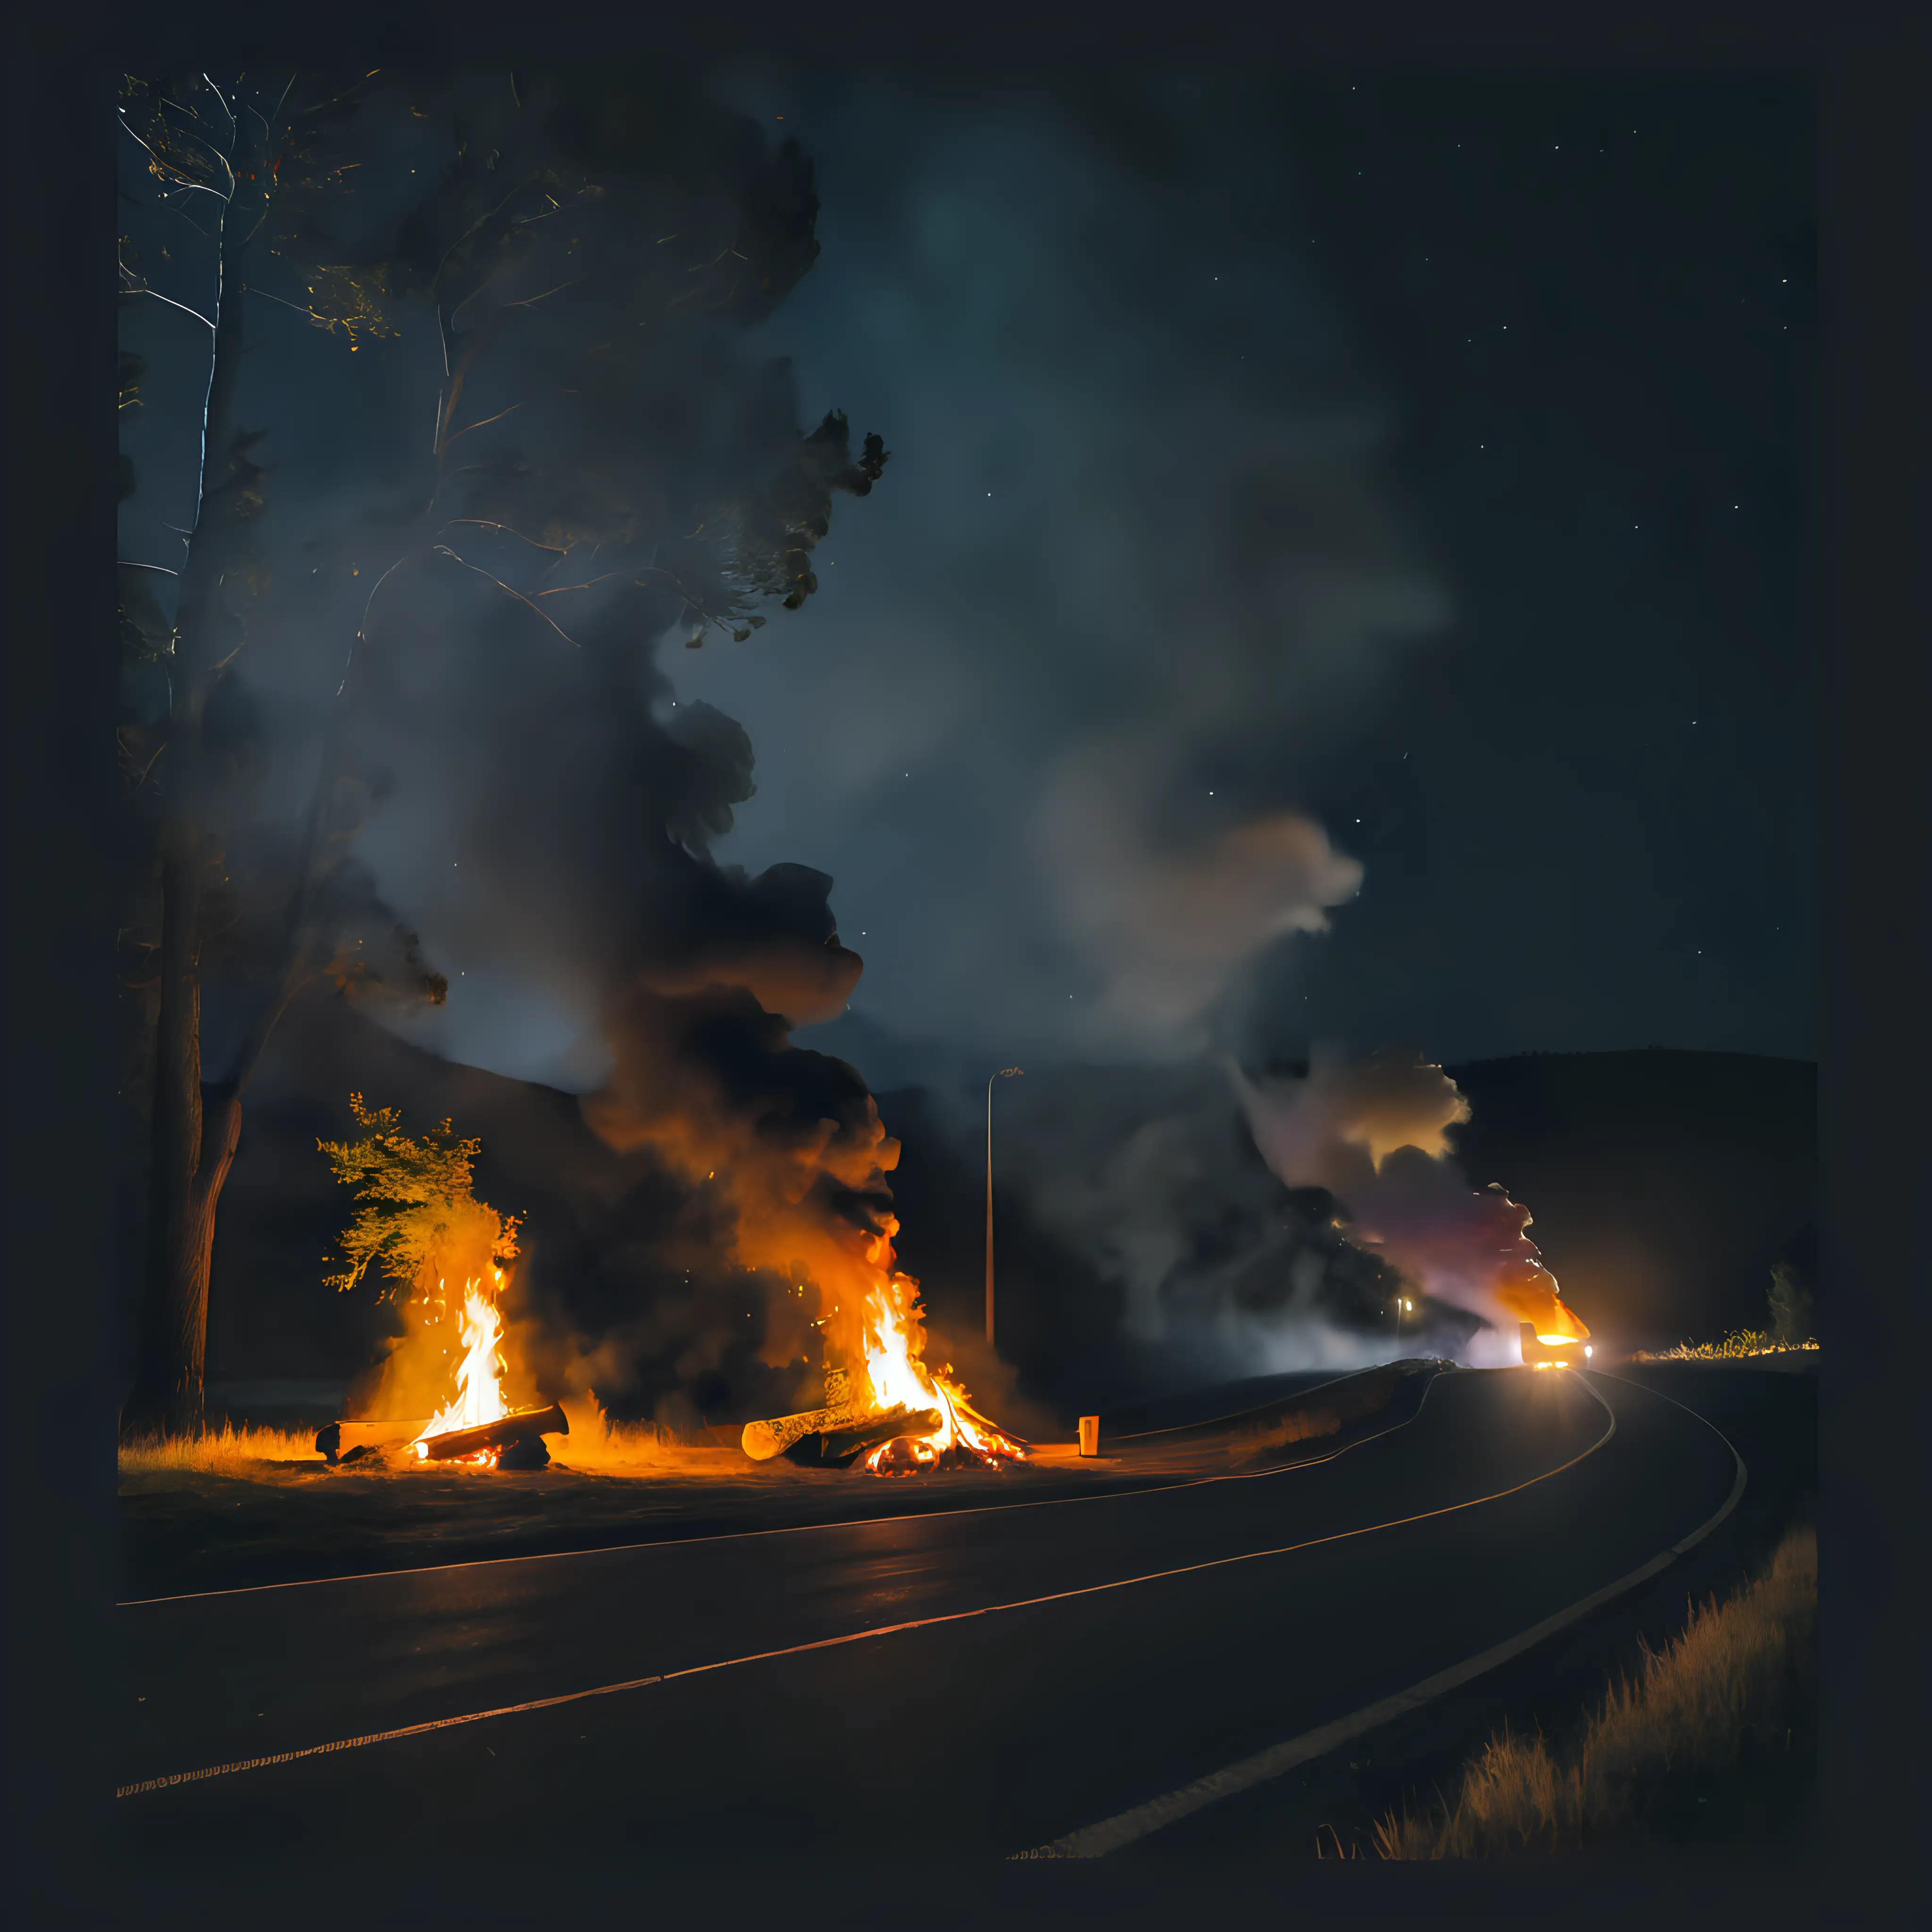 At night, with no cars, a roaring fire blazes by the side of the road, with the number 7 seen in the smoke.